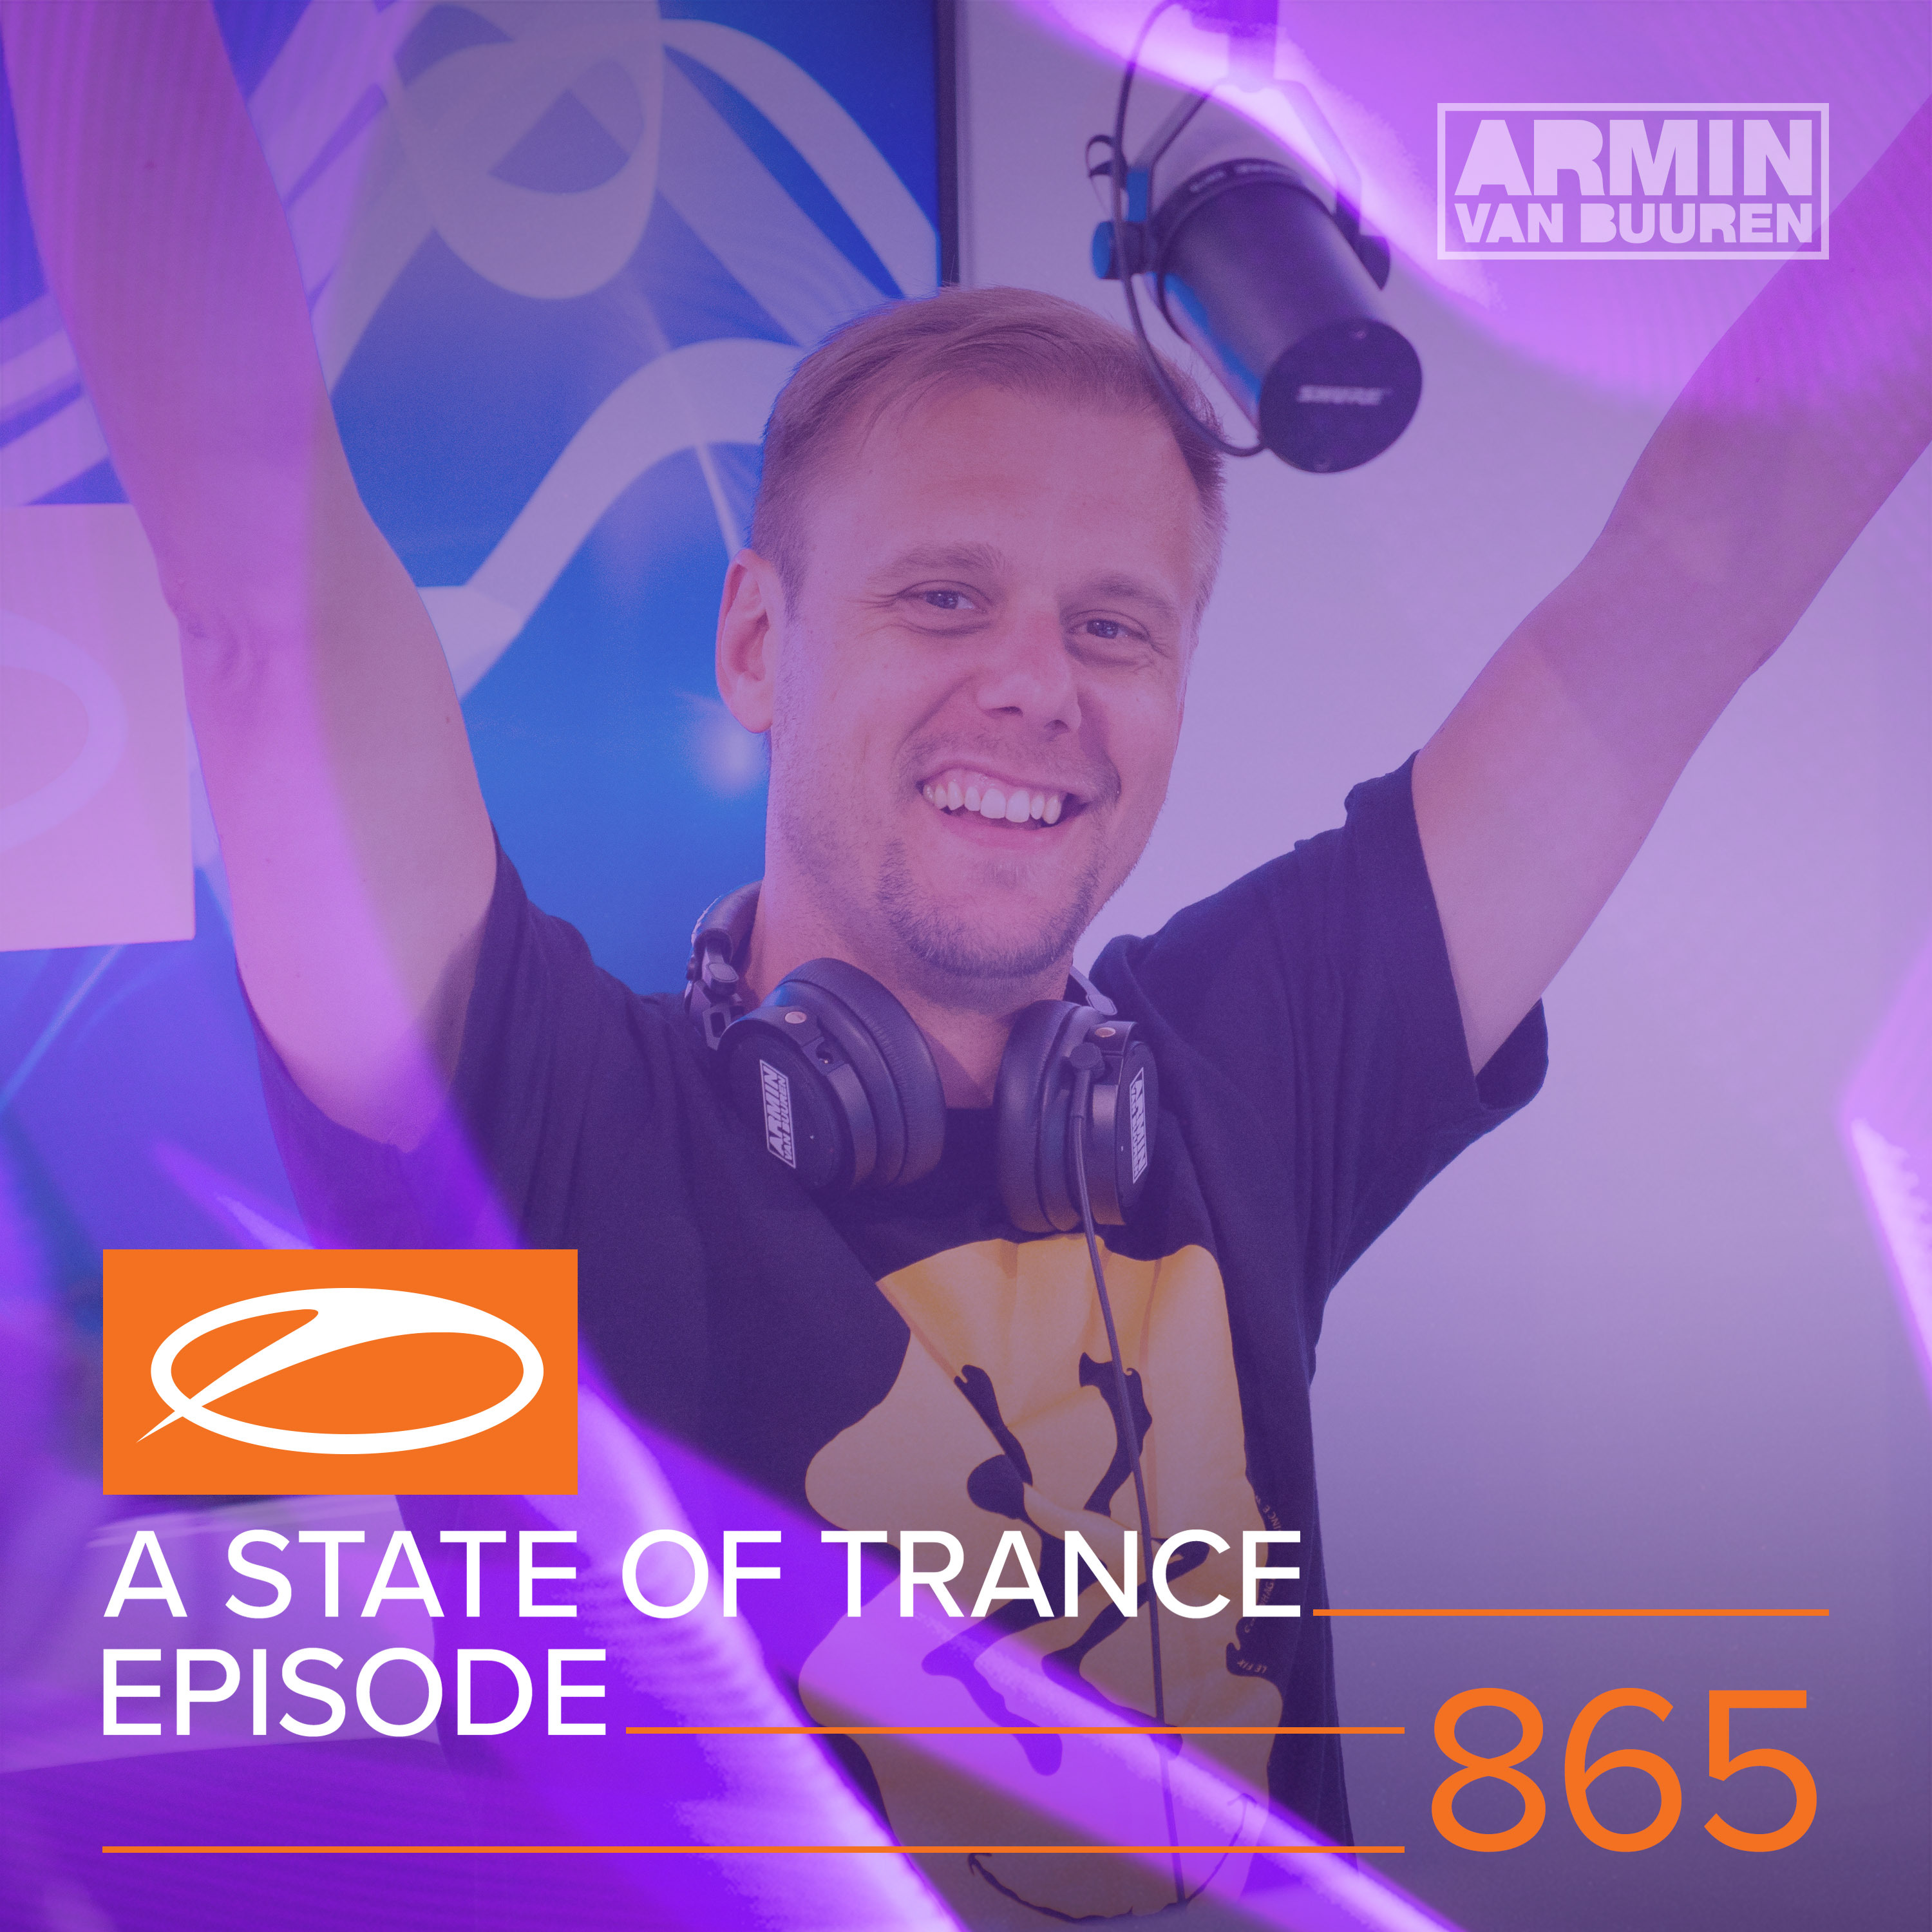 A State Of Trance Episode 865